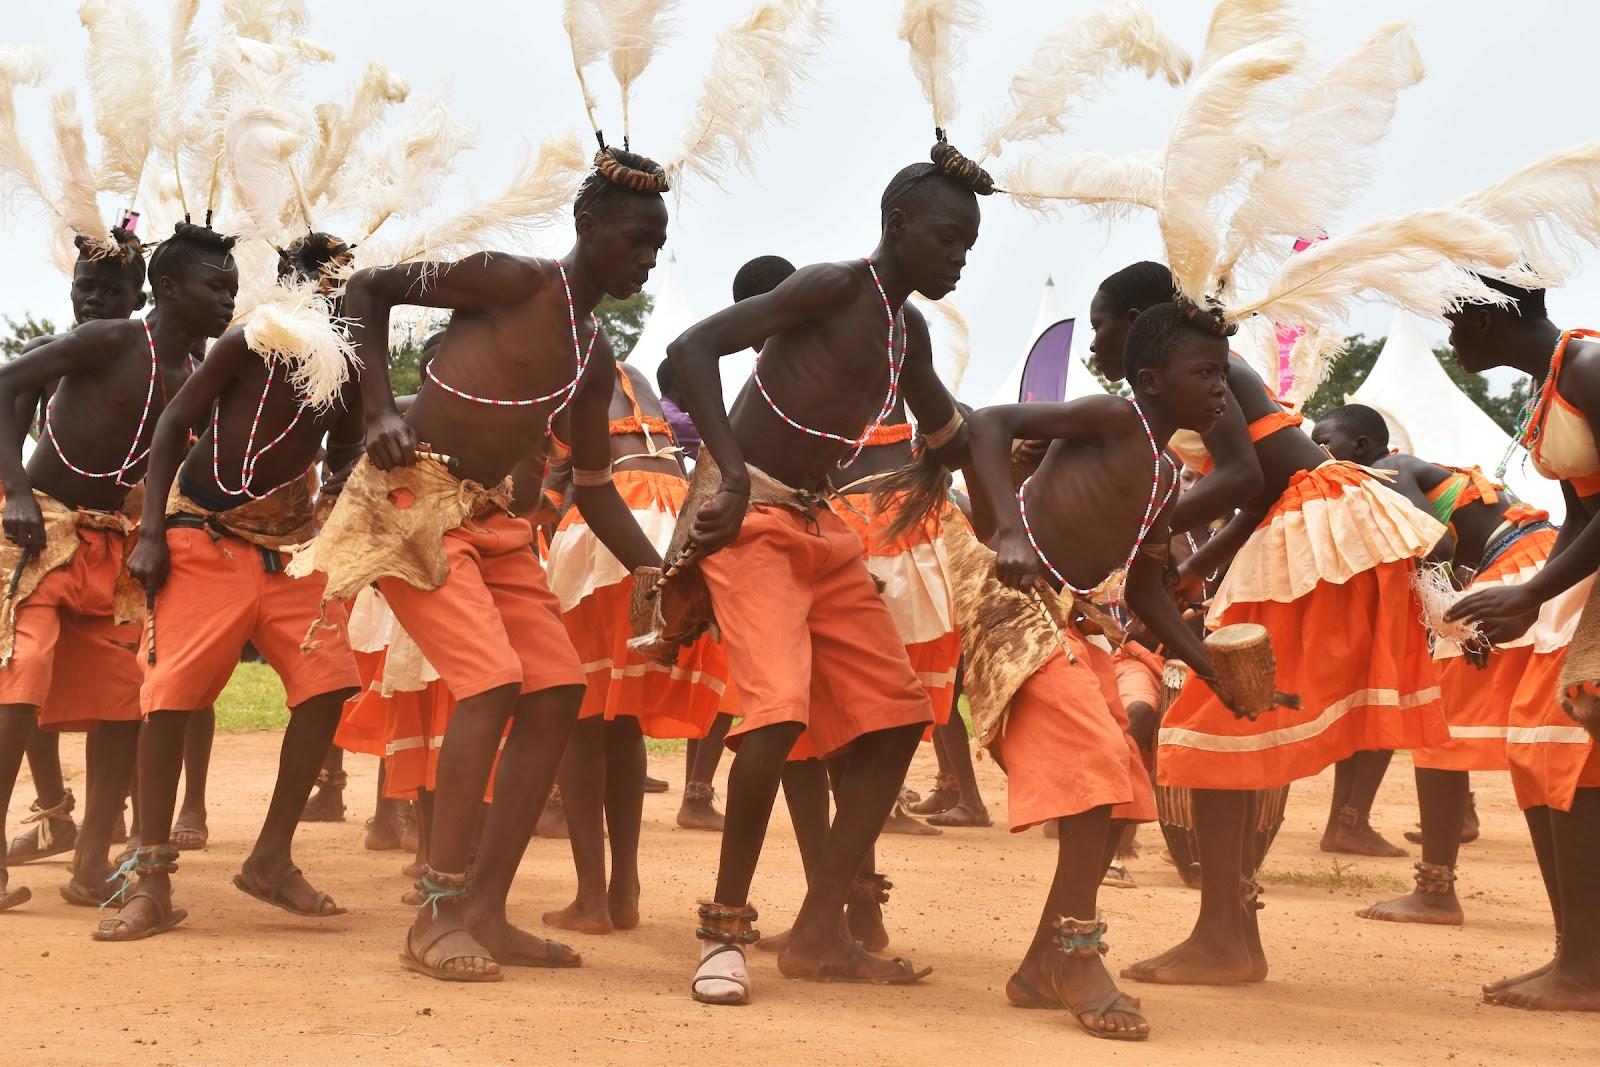 Young Ugandan men dancing and wearing traditional clothing and headdresses. 